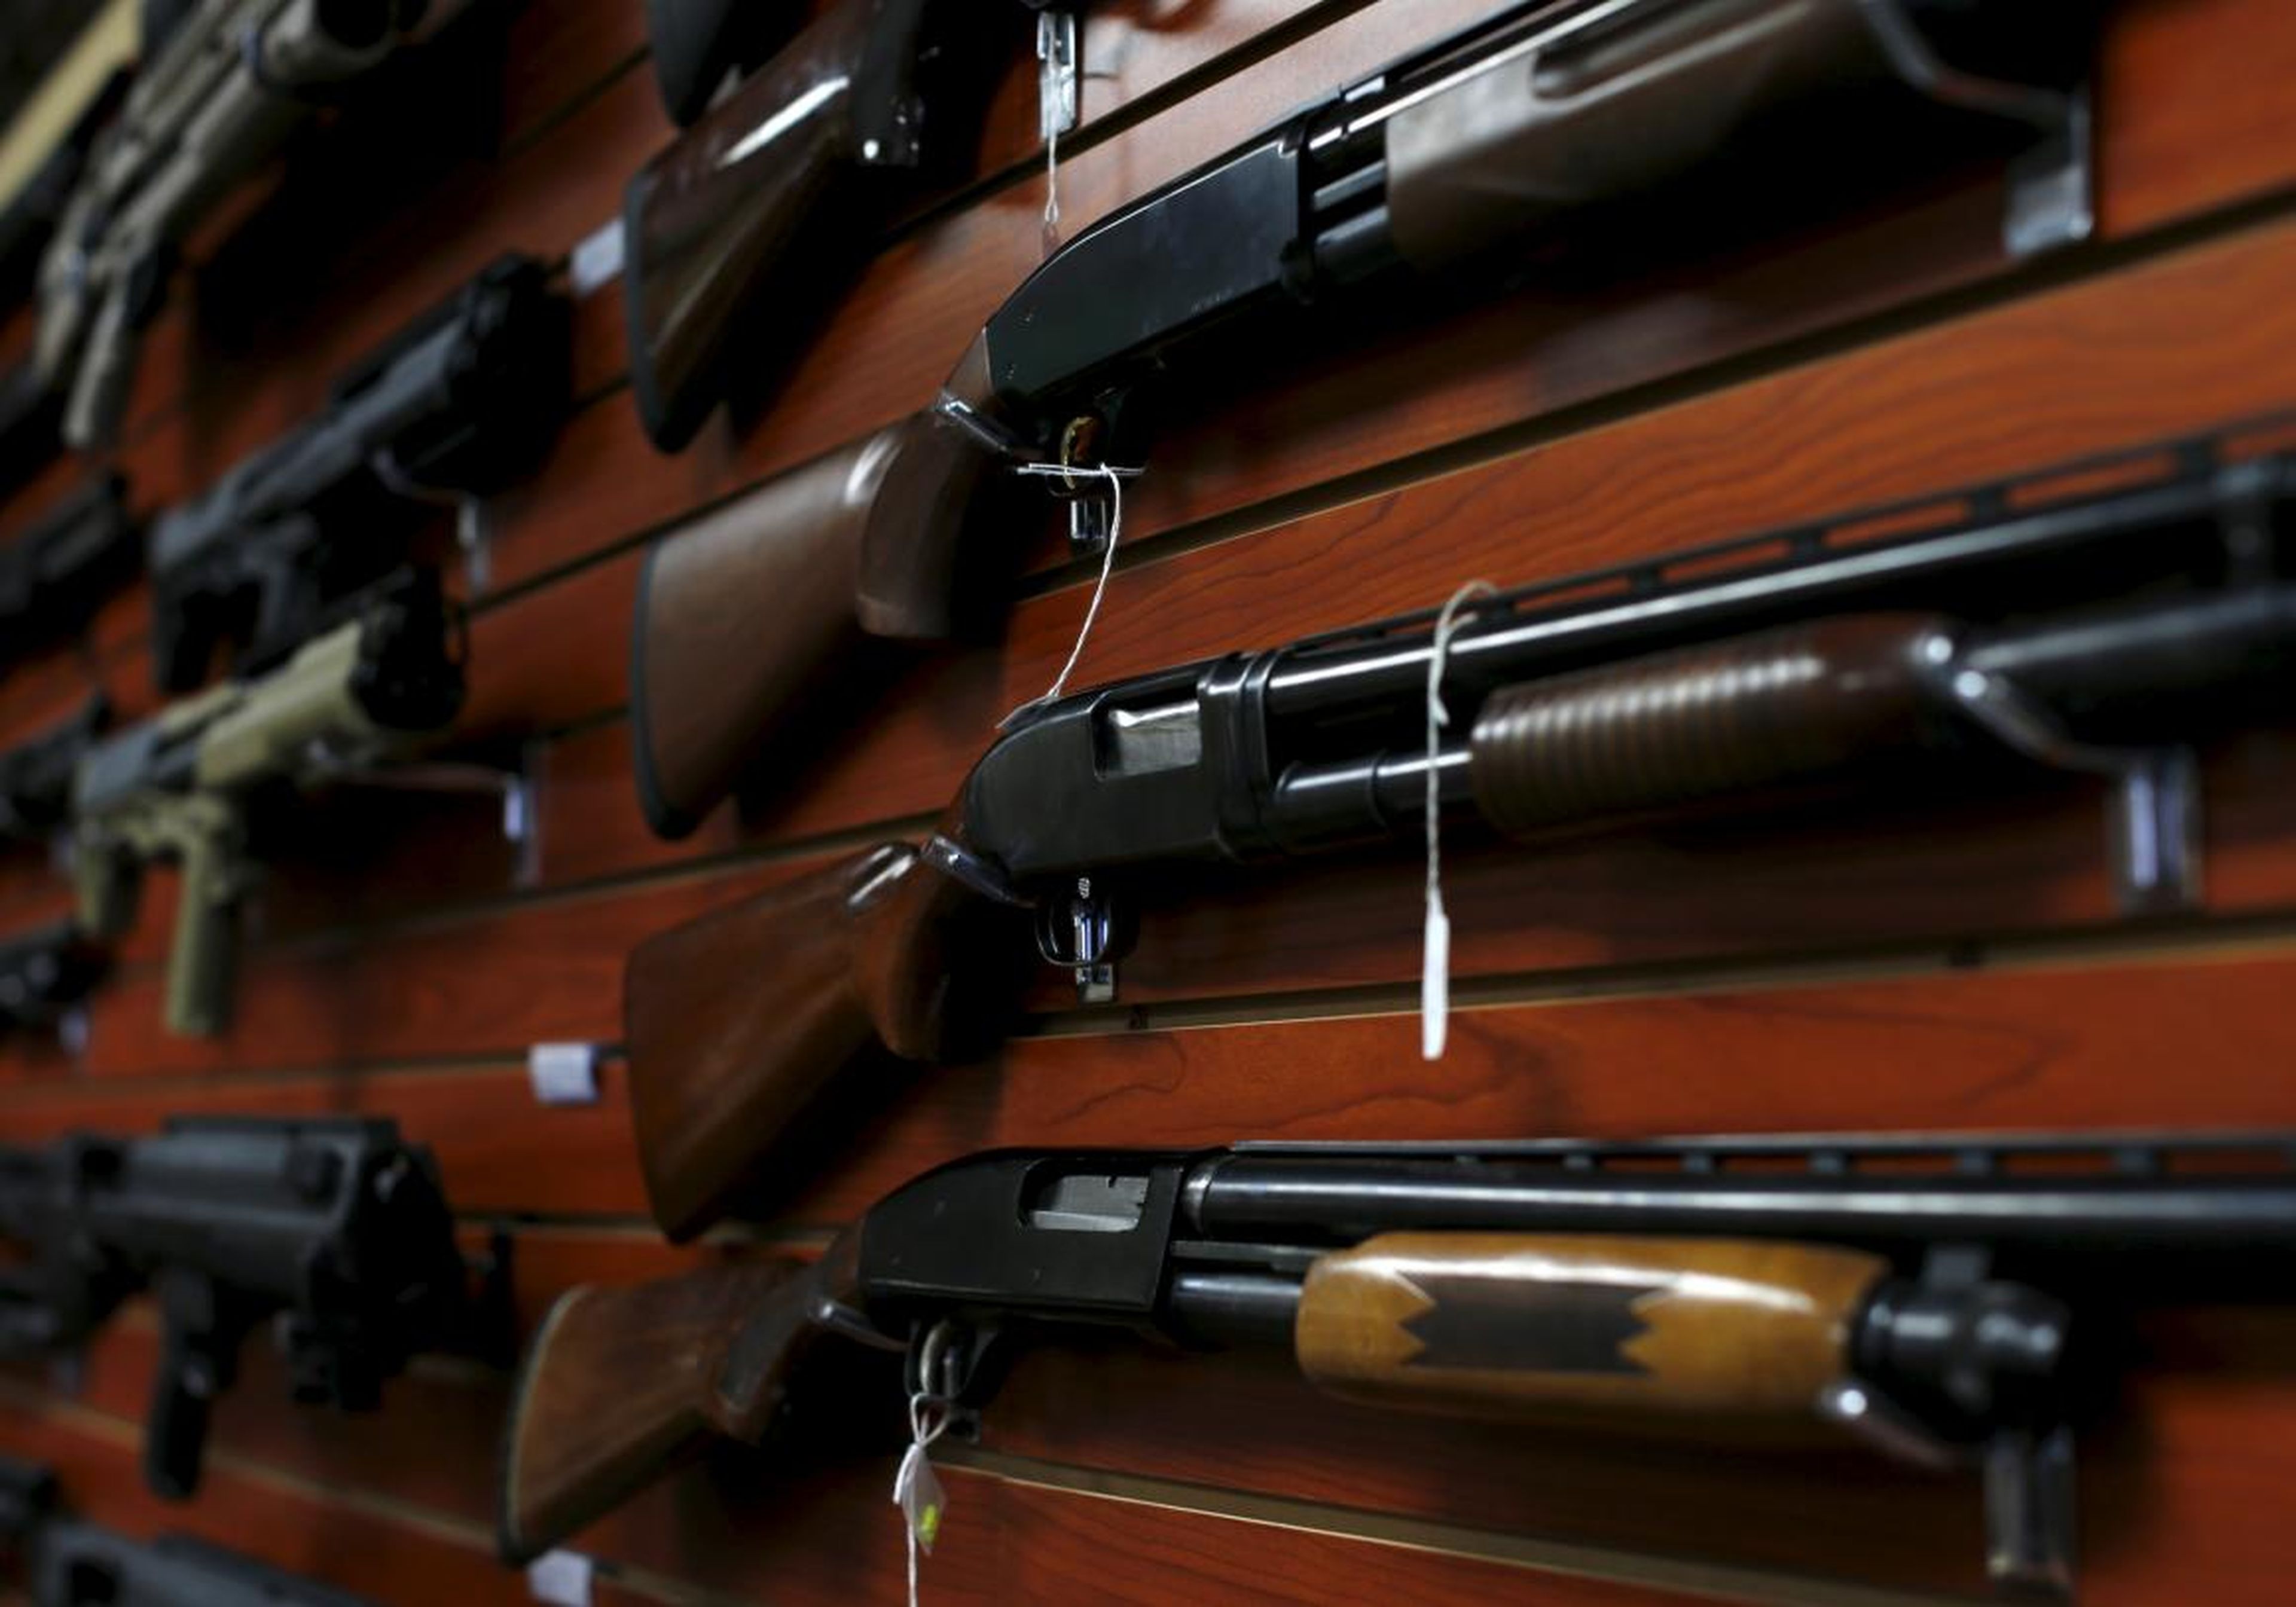 Permissive gun policies are also associated with more shooting deaths, researchers have found.